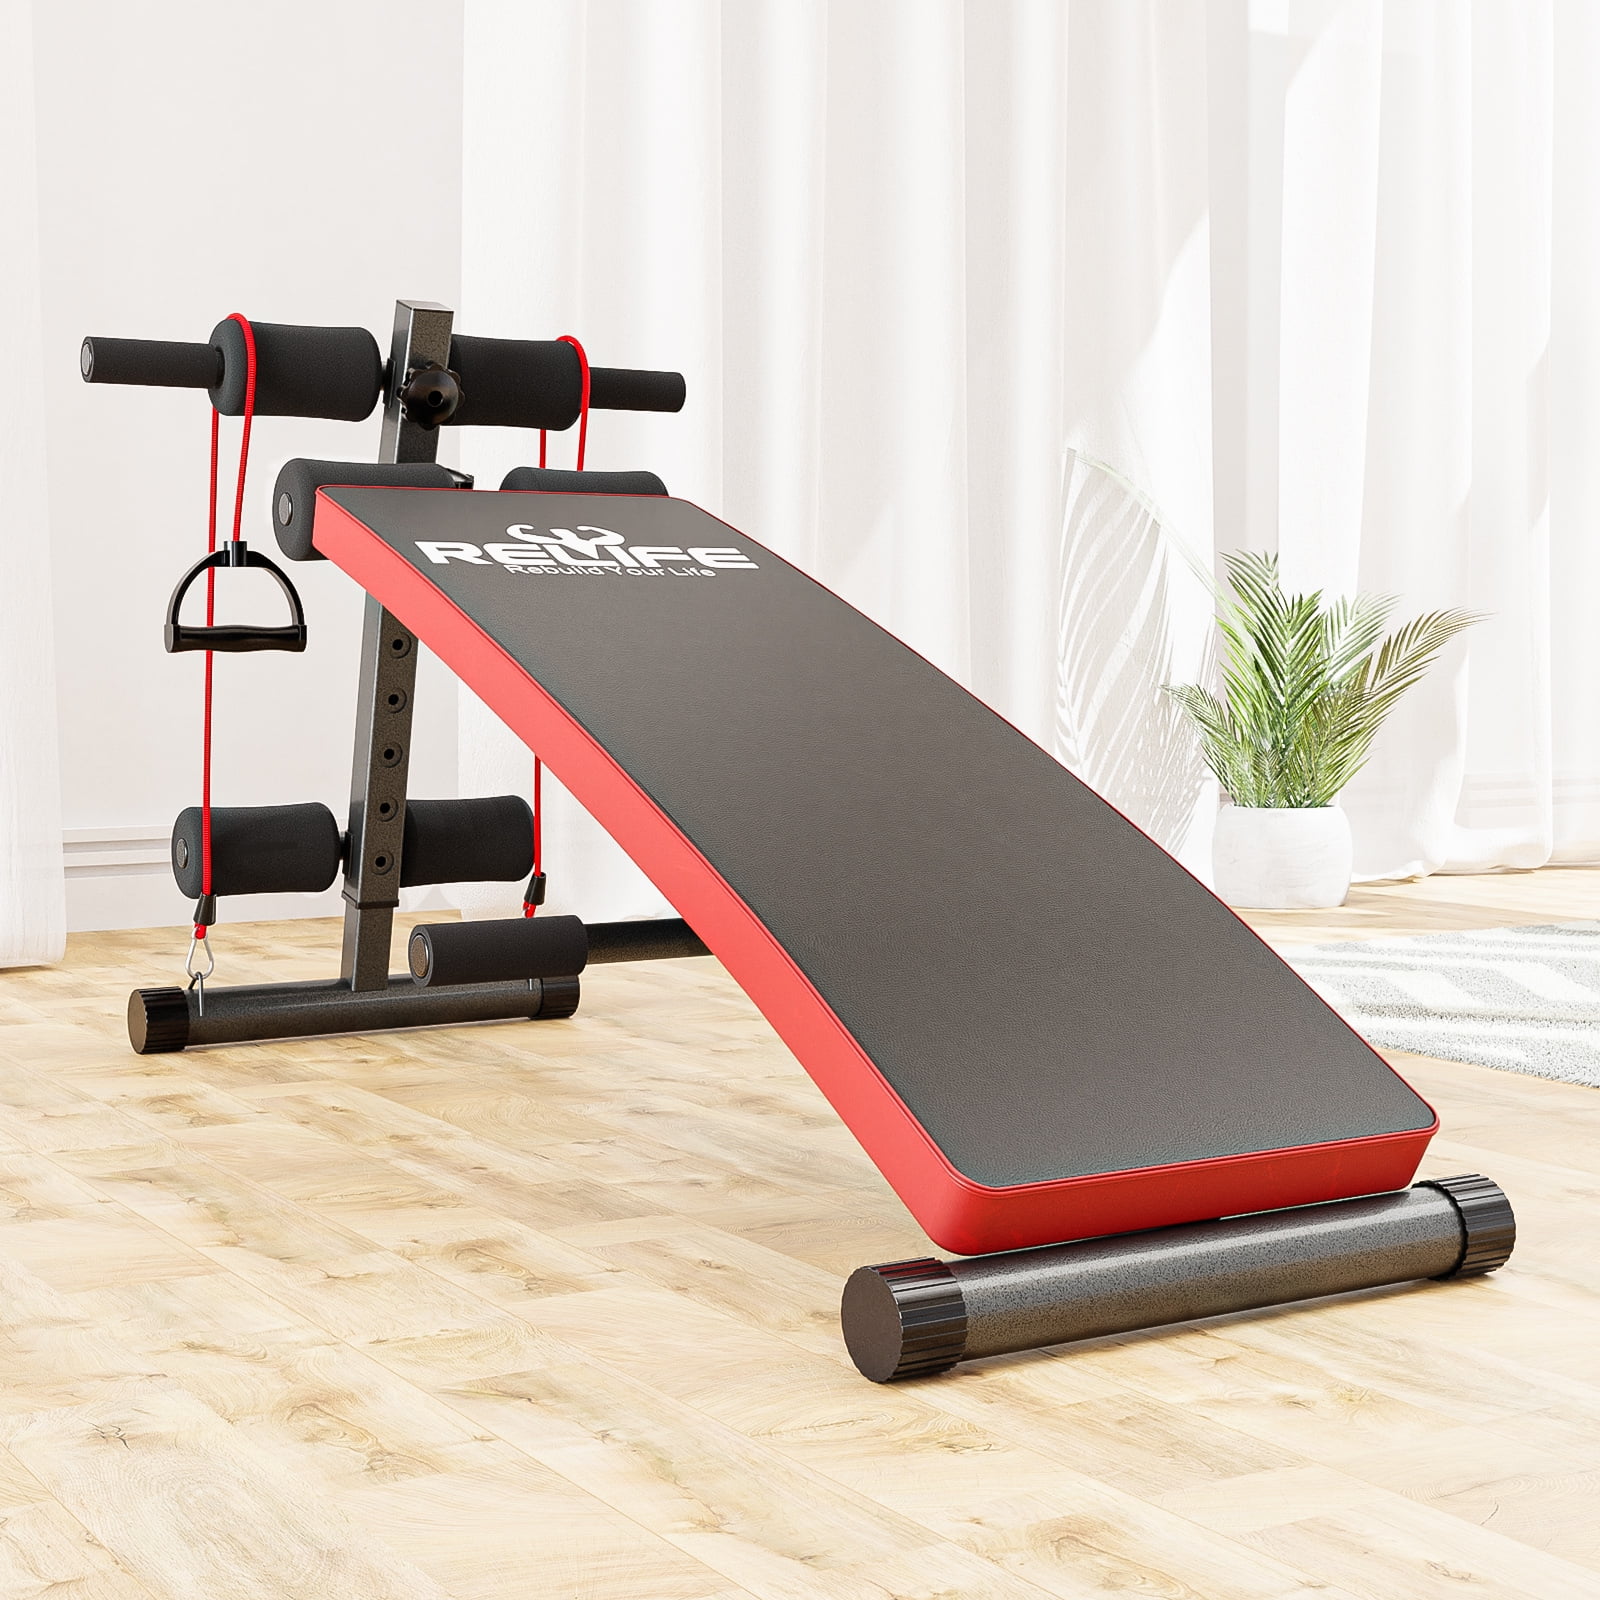 Relife Sports Foldable with Bands up Black Bench Incline for Bench, Resistant Sit Abs Slant